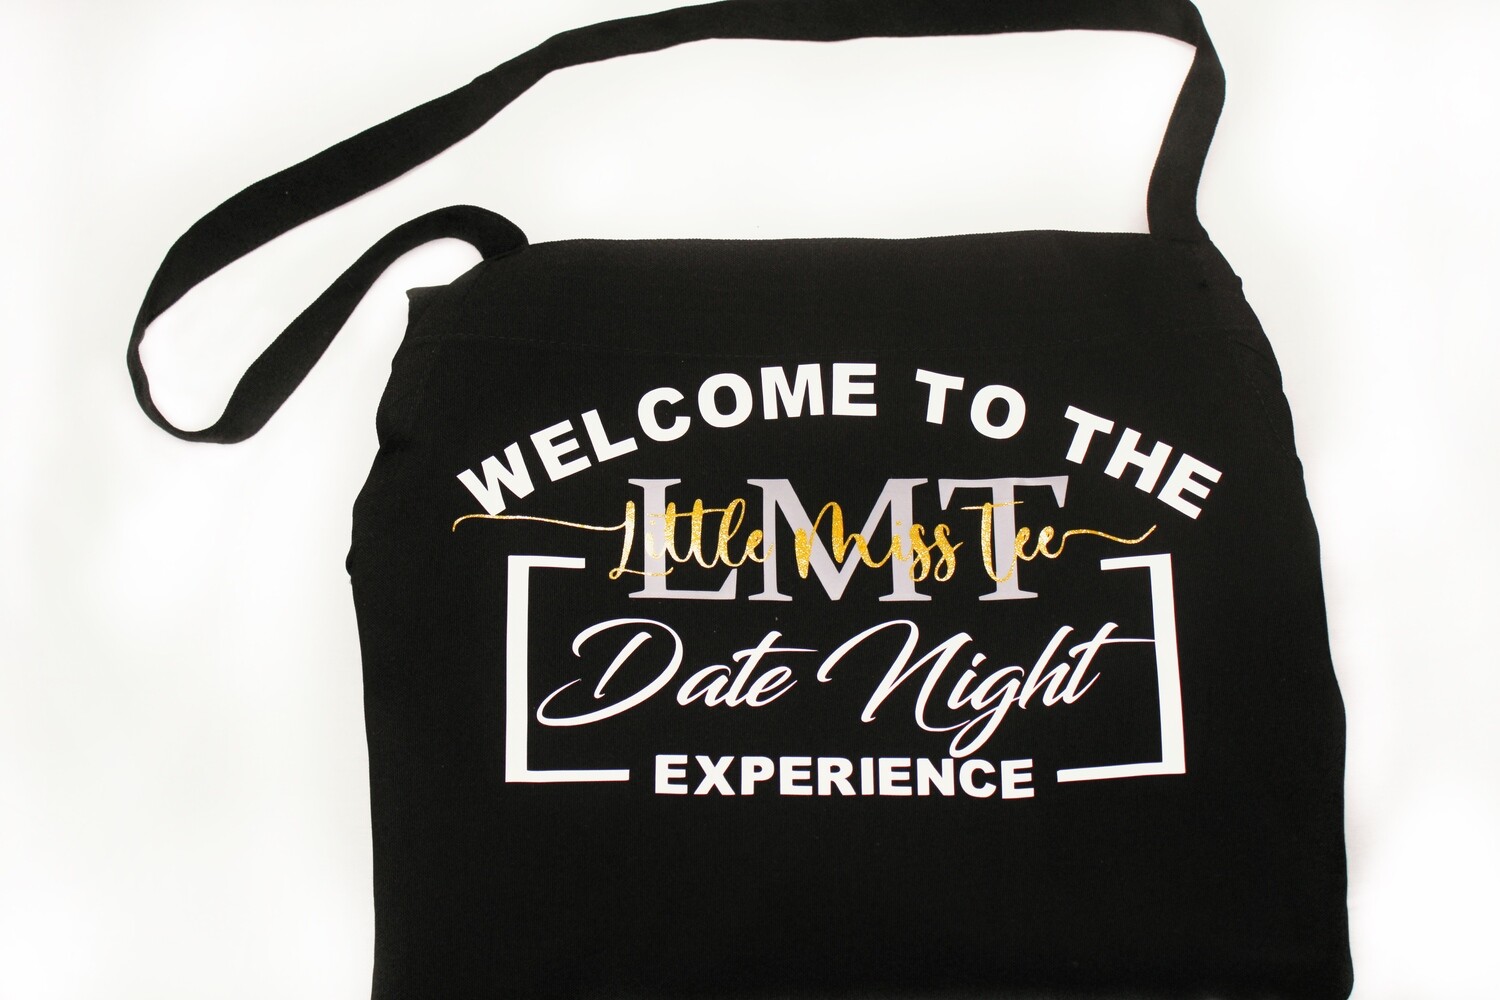 Little Miss Tee Date Night Apron (Black) 2 for $20